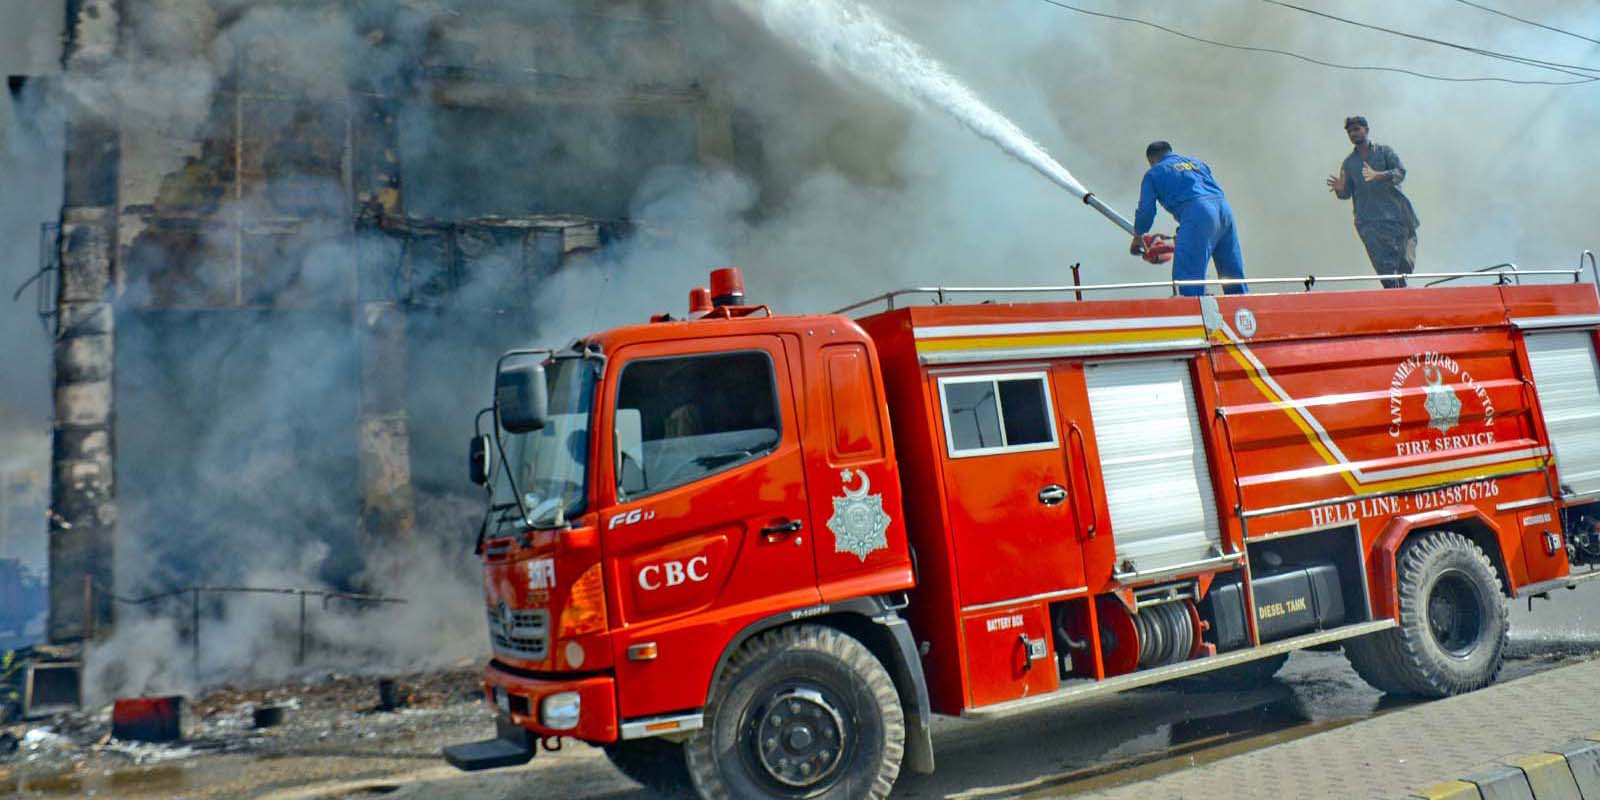 On their own: Karachi's firefighters face the heat with meagre resources